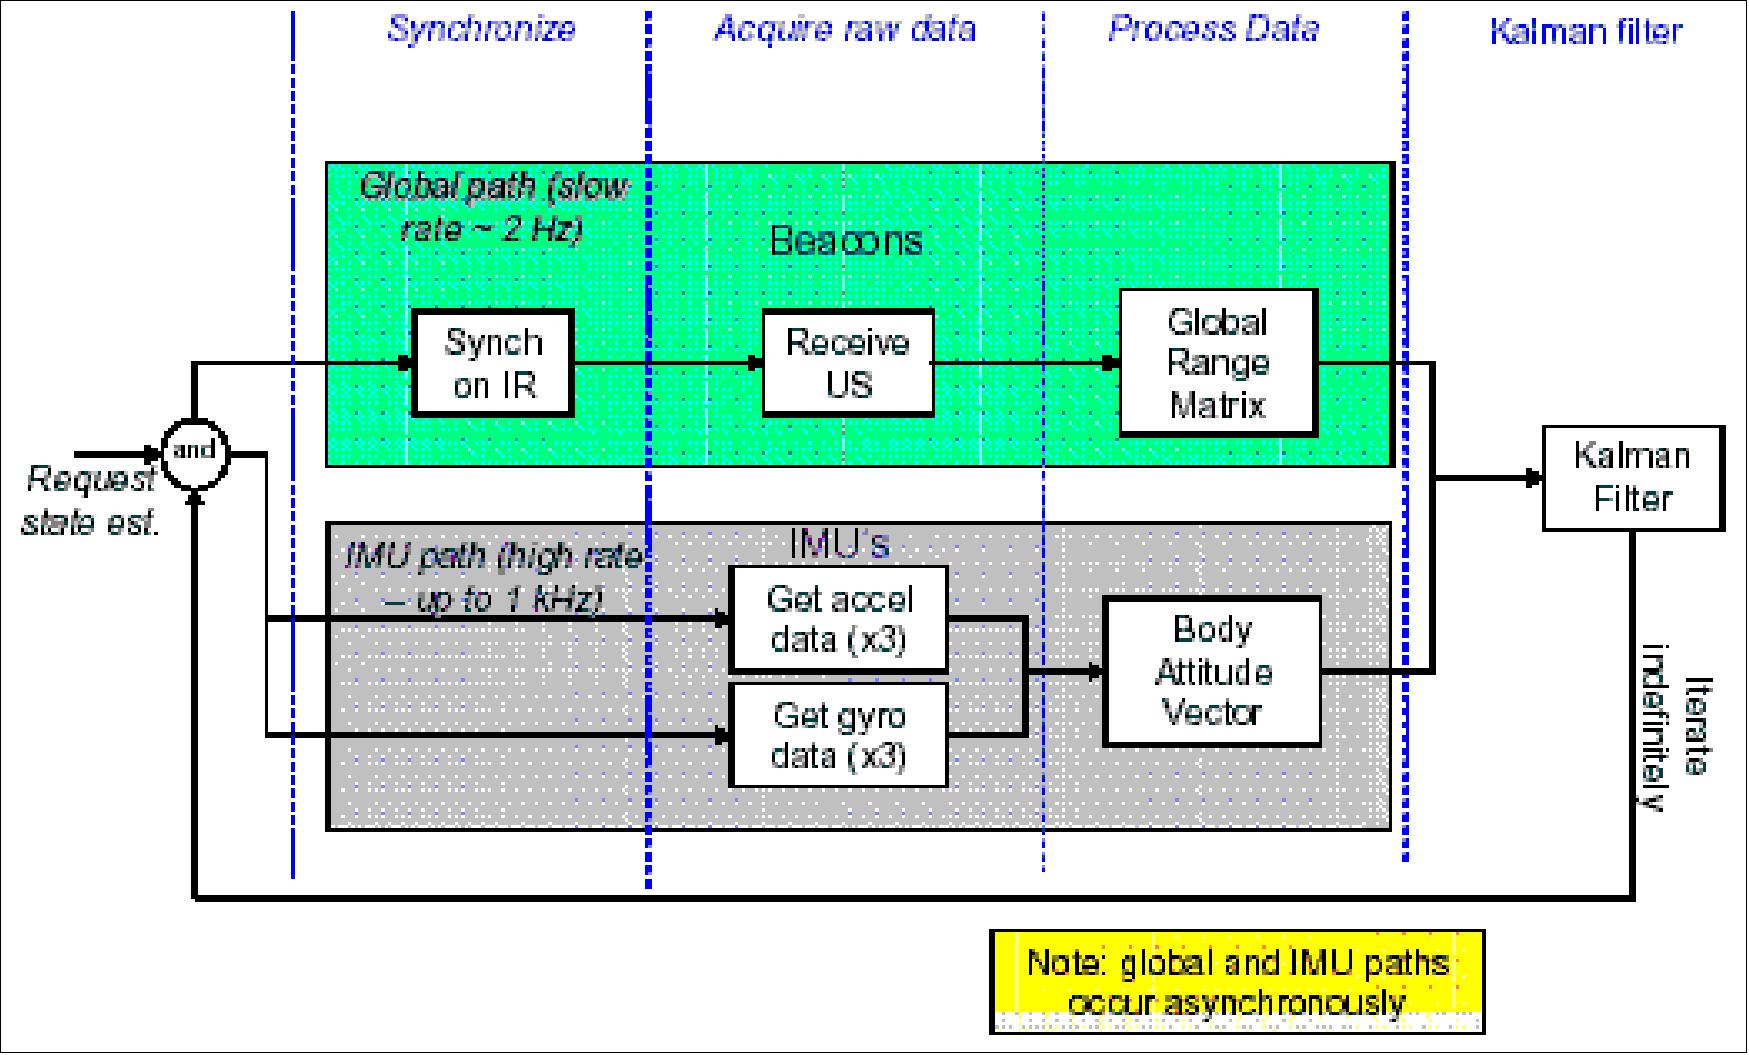 Figure 7: Block diagram of PADS (image credit: MIT/SSL, Payload Systems Inc.)